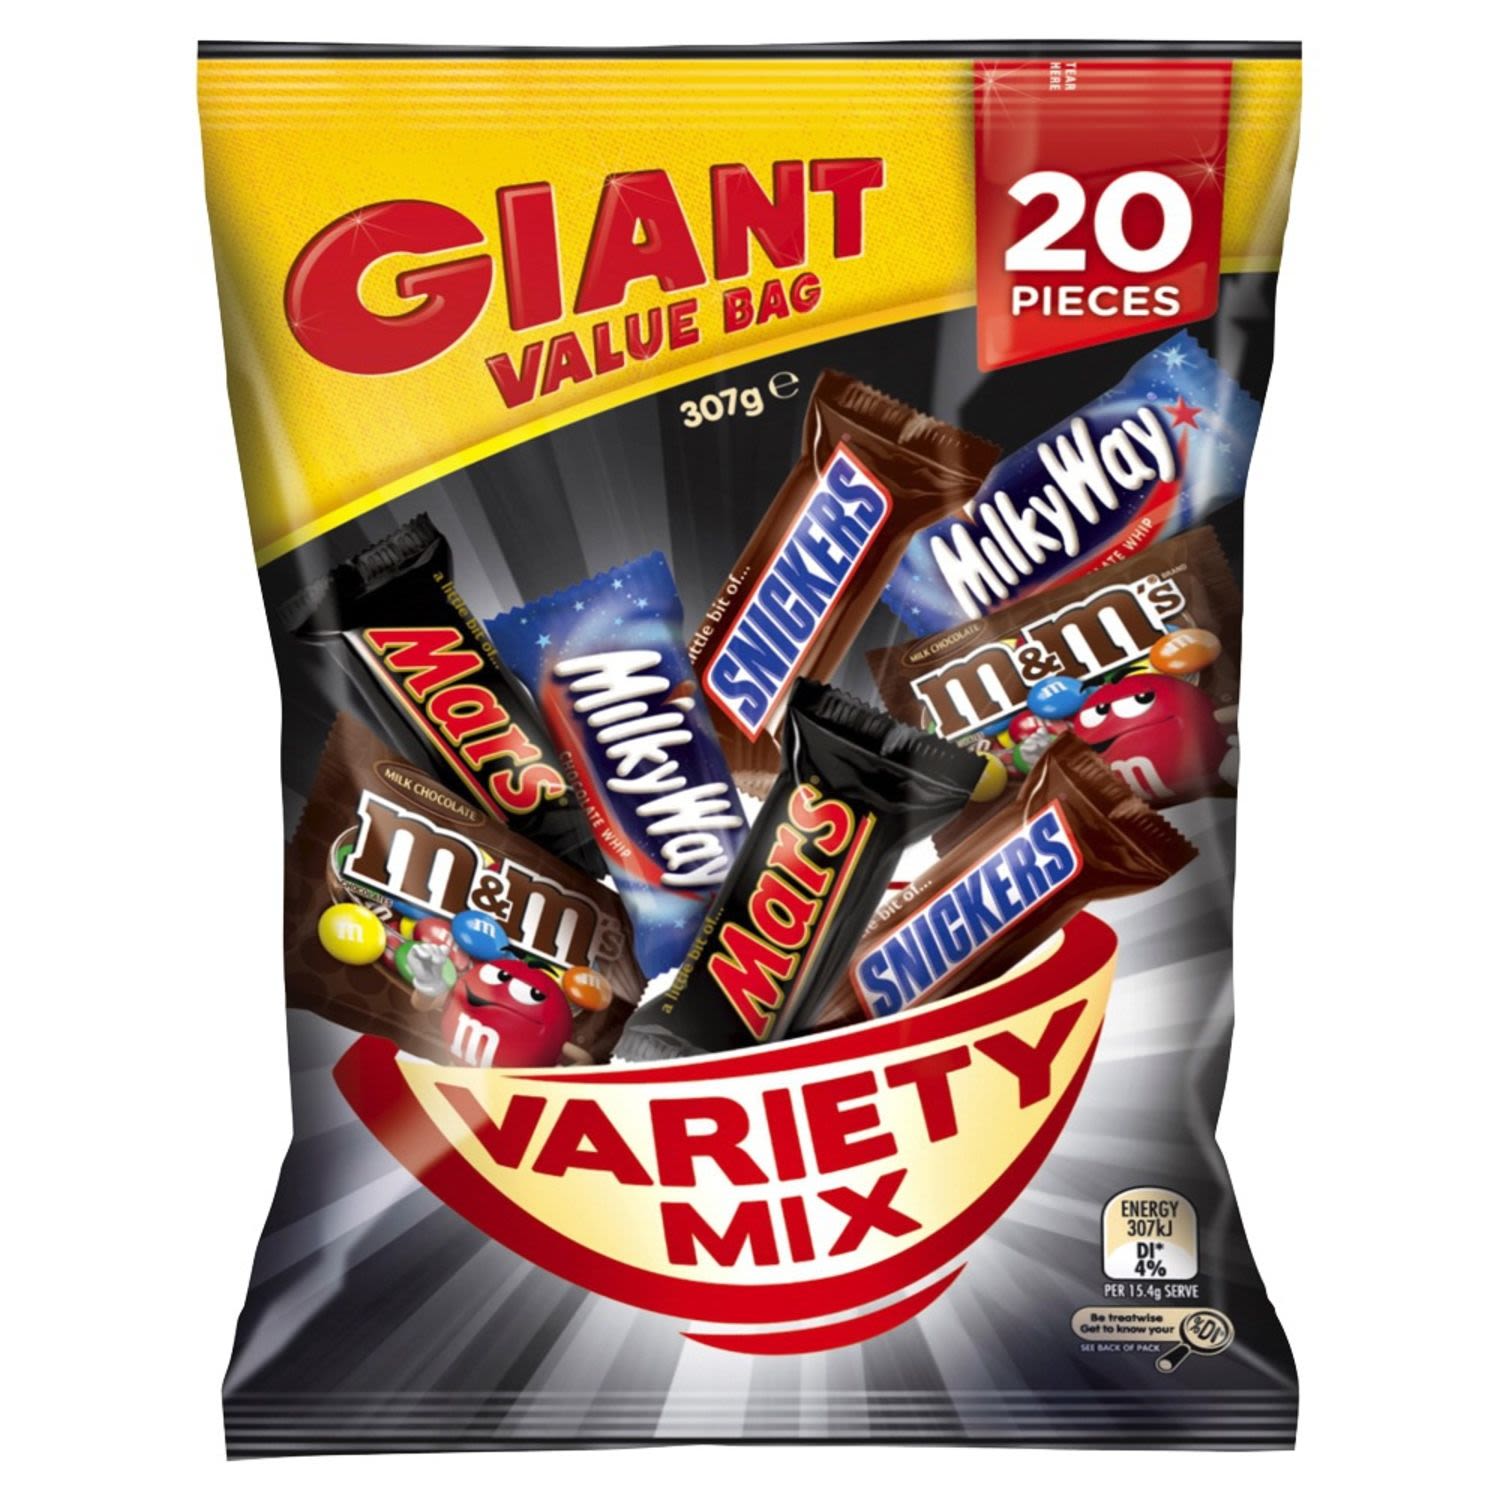 Giant Value Bag Mixed Variety Funsize, 20 Each